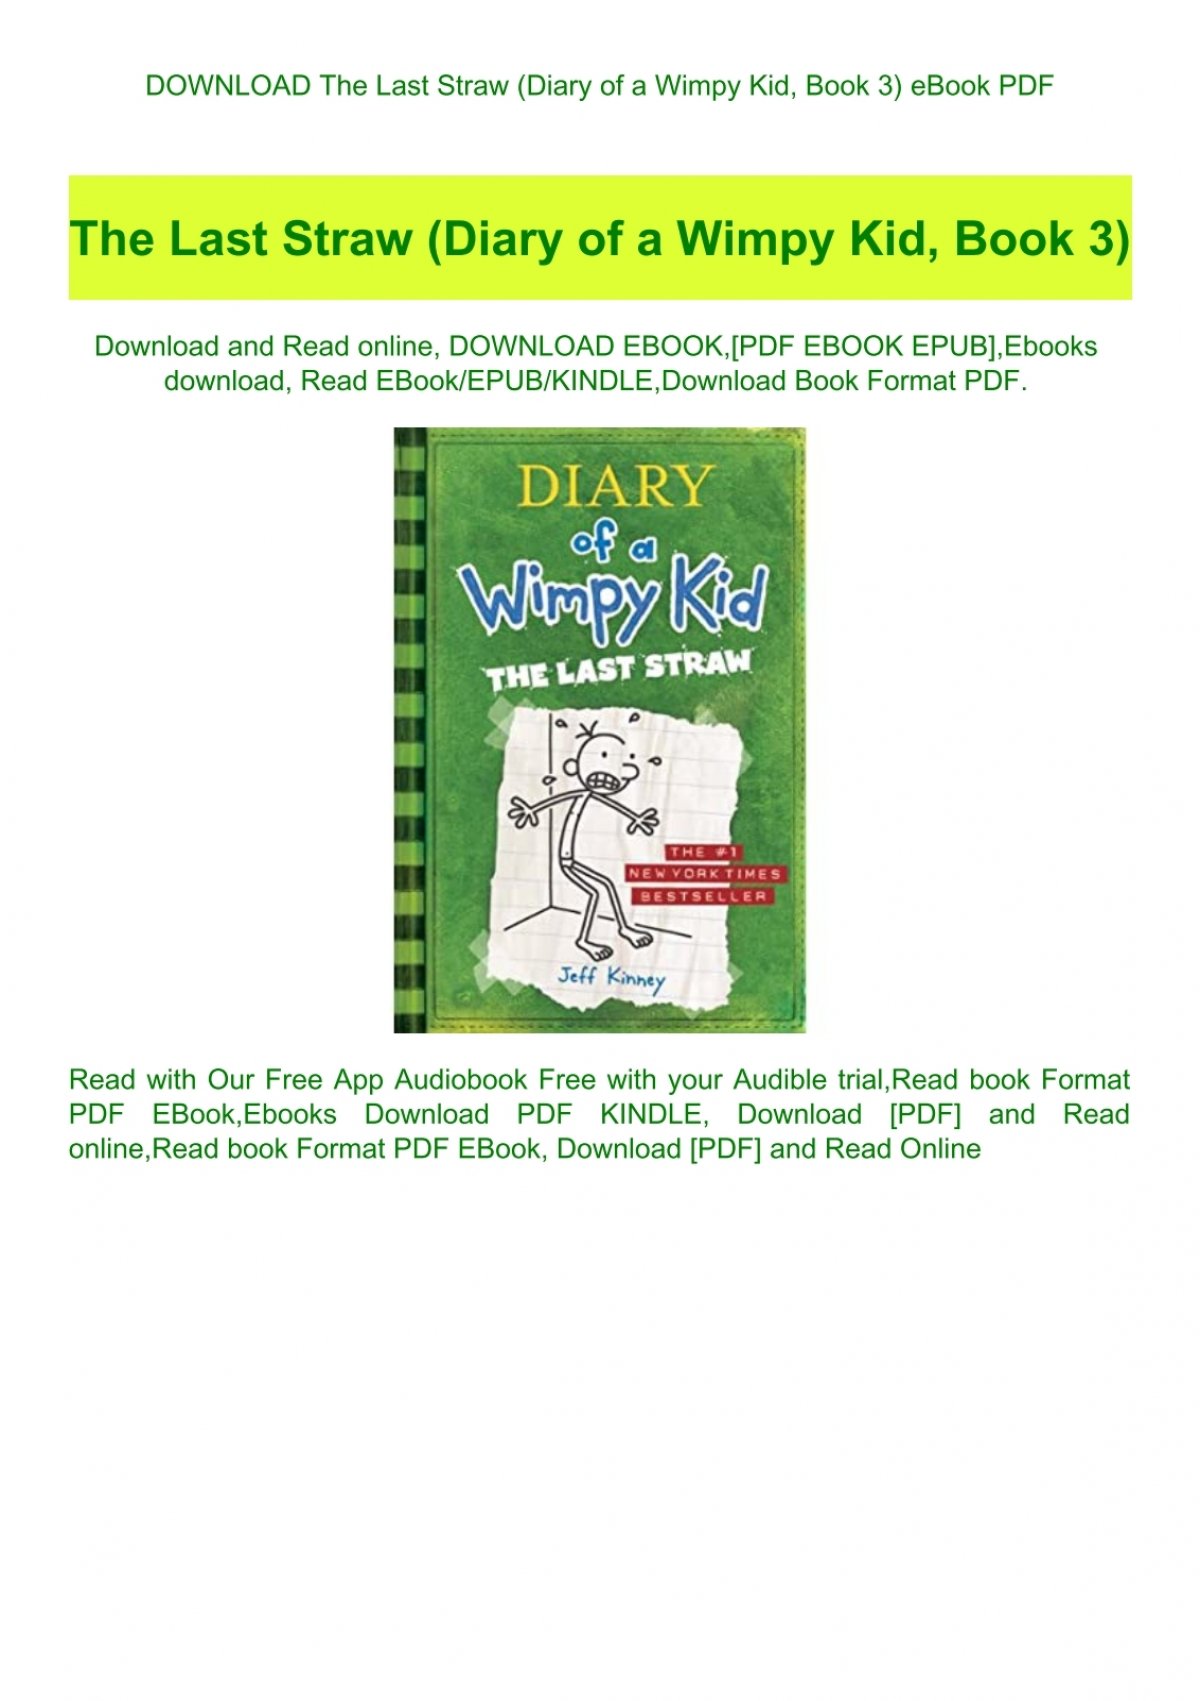 Download The Last Straw Diary Of A Wimpy Kid Book 3 Ebook Pdf